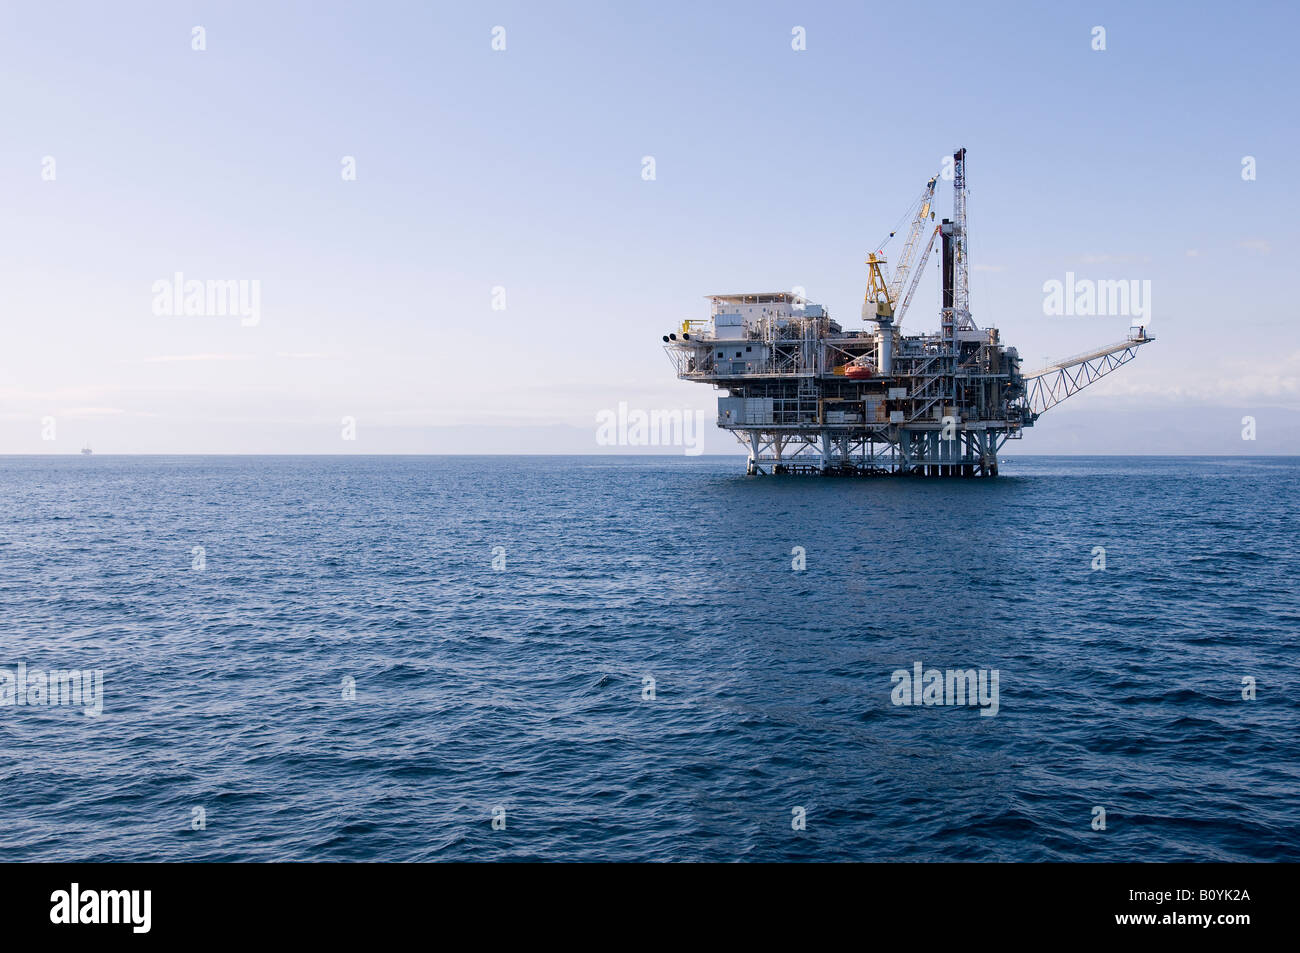 An offshore oil drilling platform stands in the Pacific Ocean off the coast of Southern California. Stock Photo